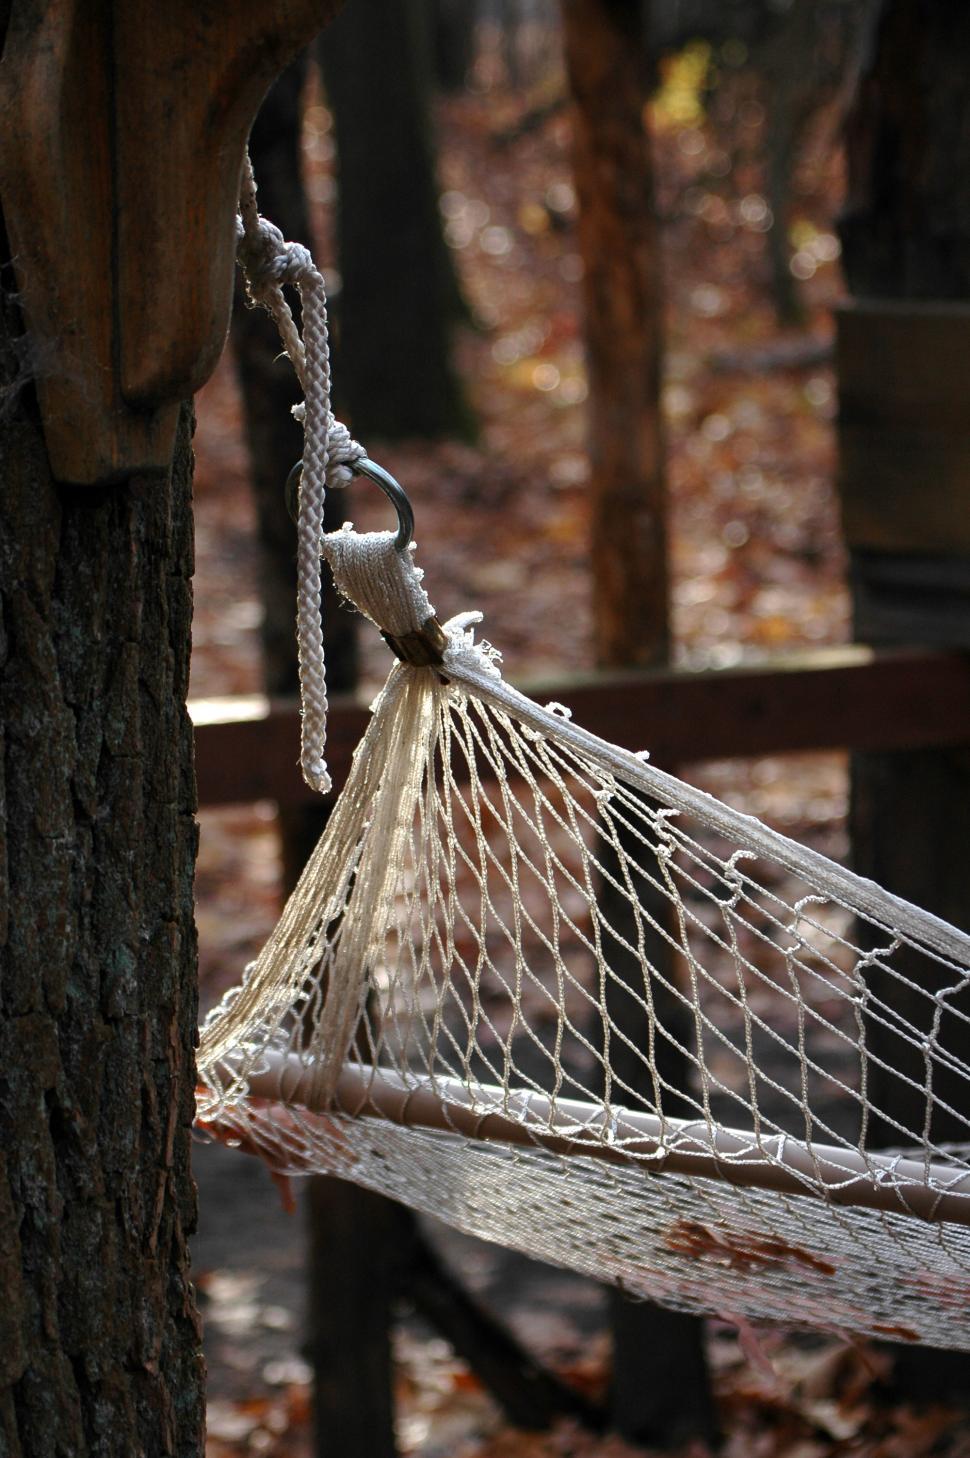 Free Image of Hammock Hanging From Tree in Woods 